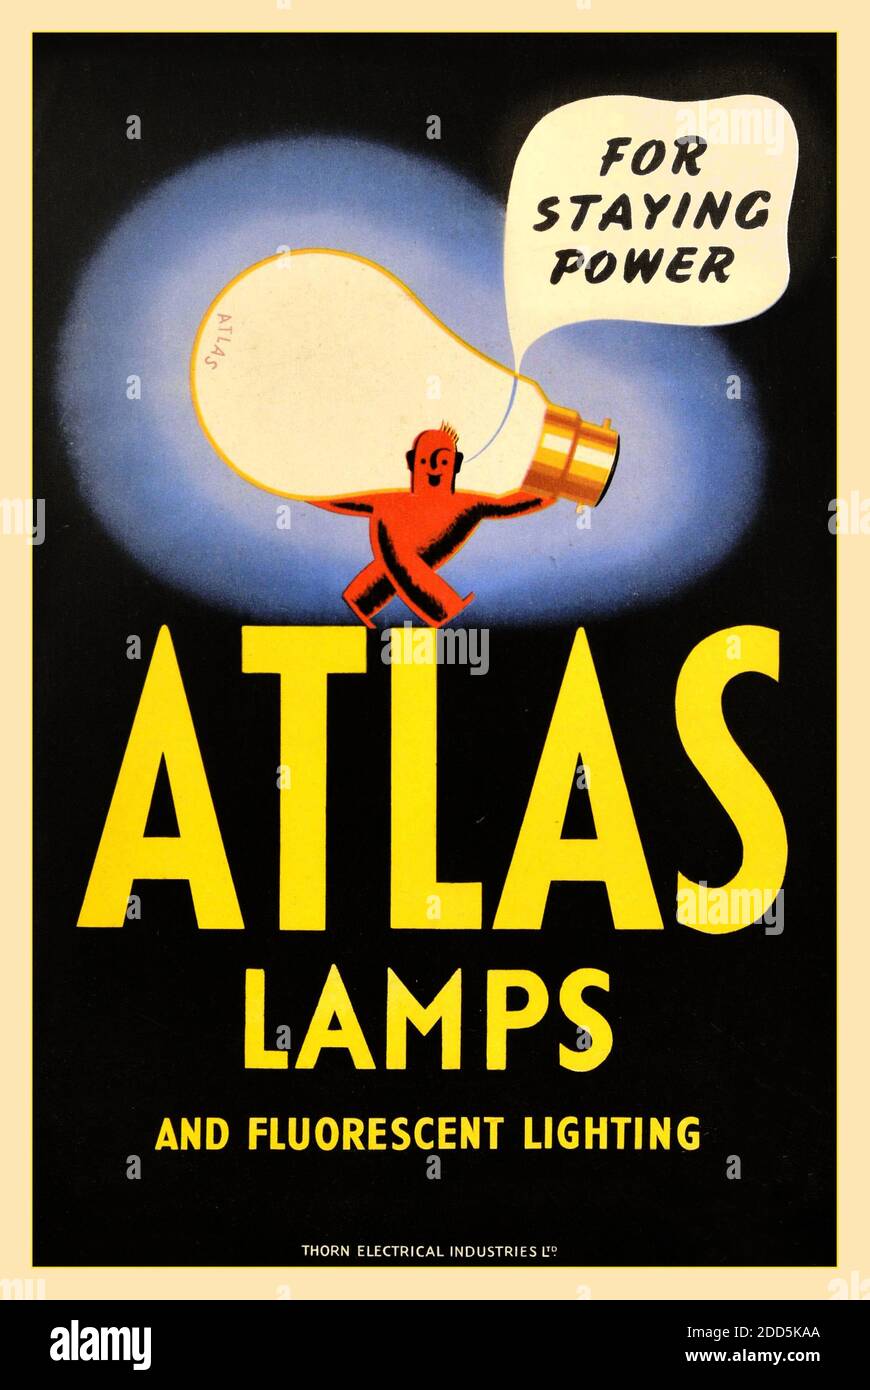 ATLAS LAMPS 1930’s Vintage Archive  British UK advertising poster’ FOR STAYING POWER’  issued by Atlas Lamps and Fluorescent Lighting. Art Deco design of a red man carrying a massive light bulb with a caption FOR STAYING POWER’ Country of issue: UK, year of printing: 1930s Stock Photo